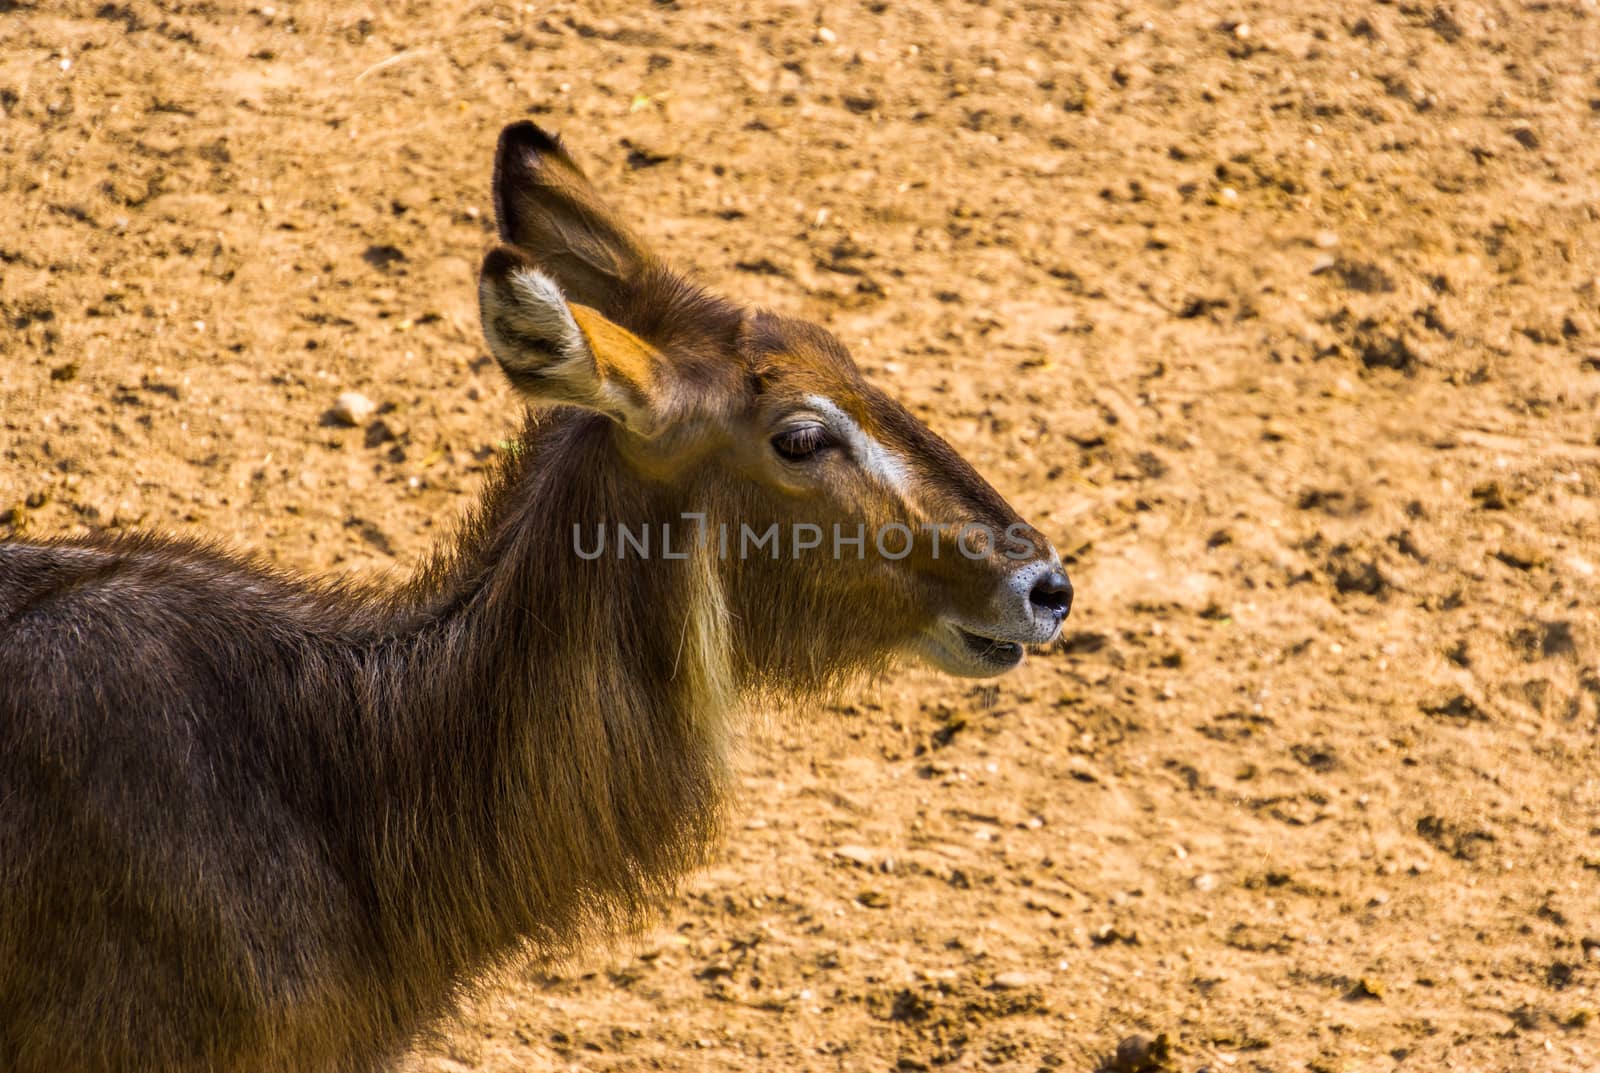 closeup of the face of a ellipsen waterbuck, tropical antelope specie from Africa